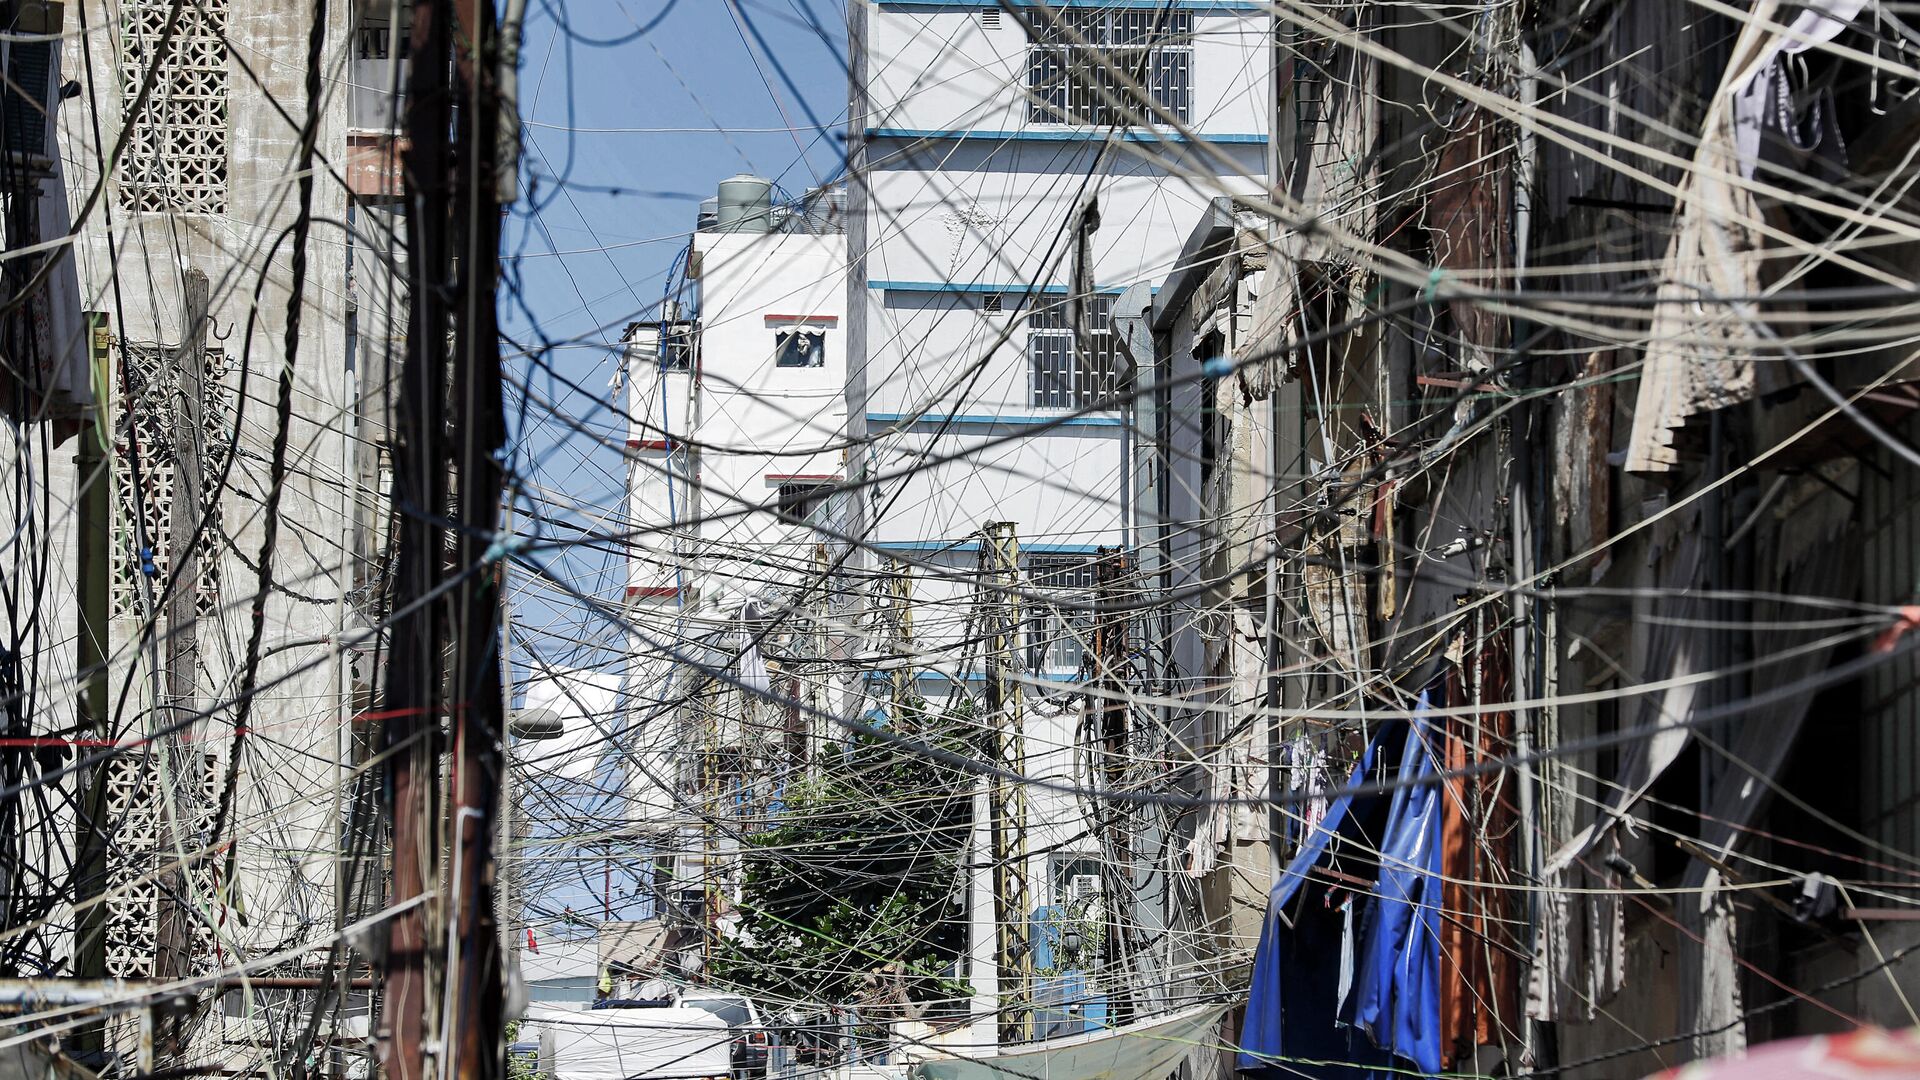 This file photo taken on June 23, 2021, shows a view of a mesh of raised electricity lines along a street in a suburb of Lebanon's capital Beirut. - Lebanon was plunged into a total blackout today after two main power stations went offline because they ran out of fuel, the state electricity corporation said. - Sputnik International, 1920, 14.10.2021